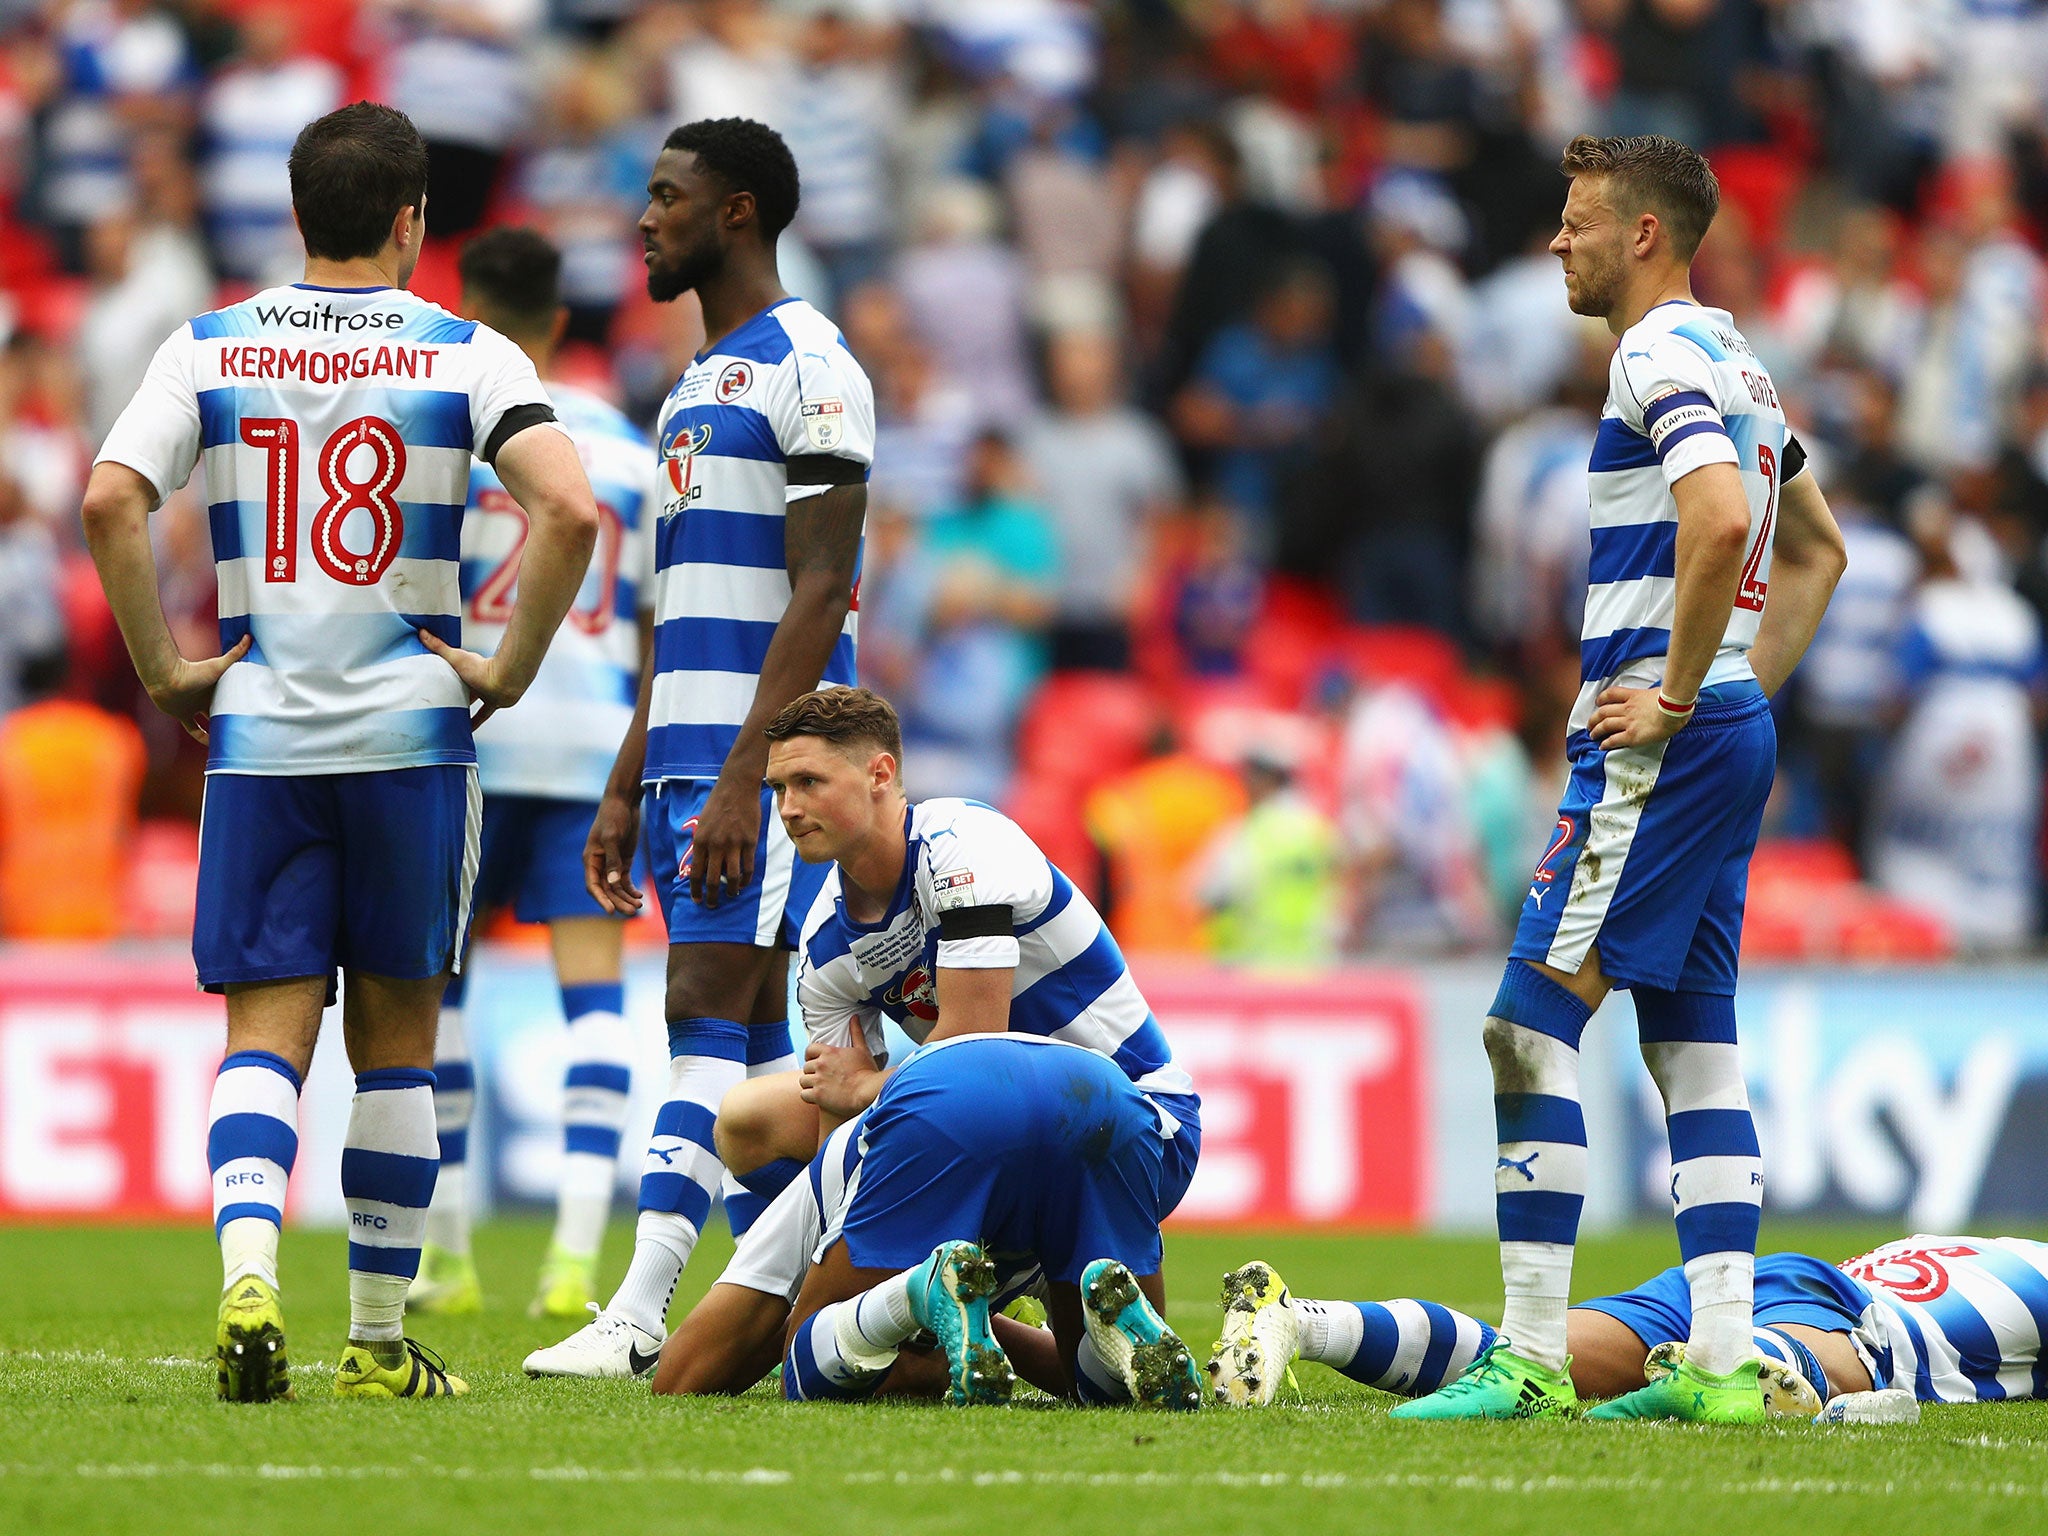 It was heartbreak for Reading and their fans